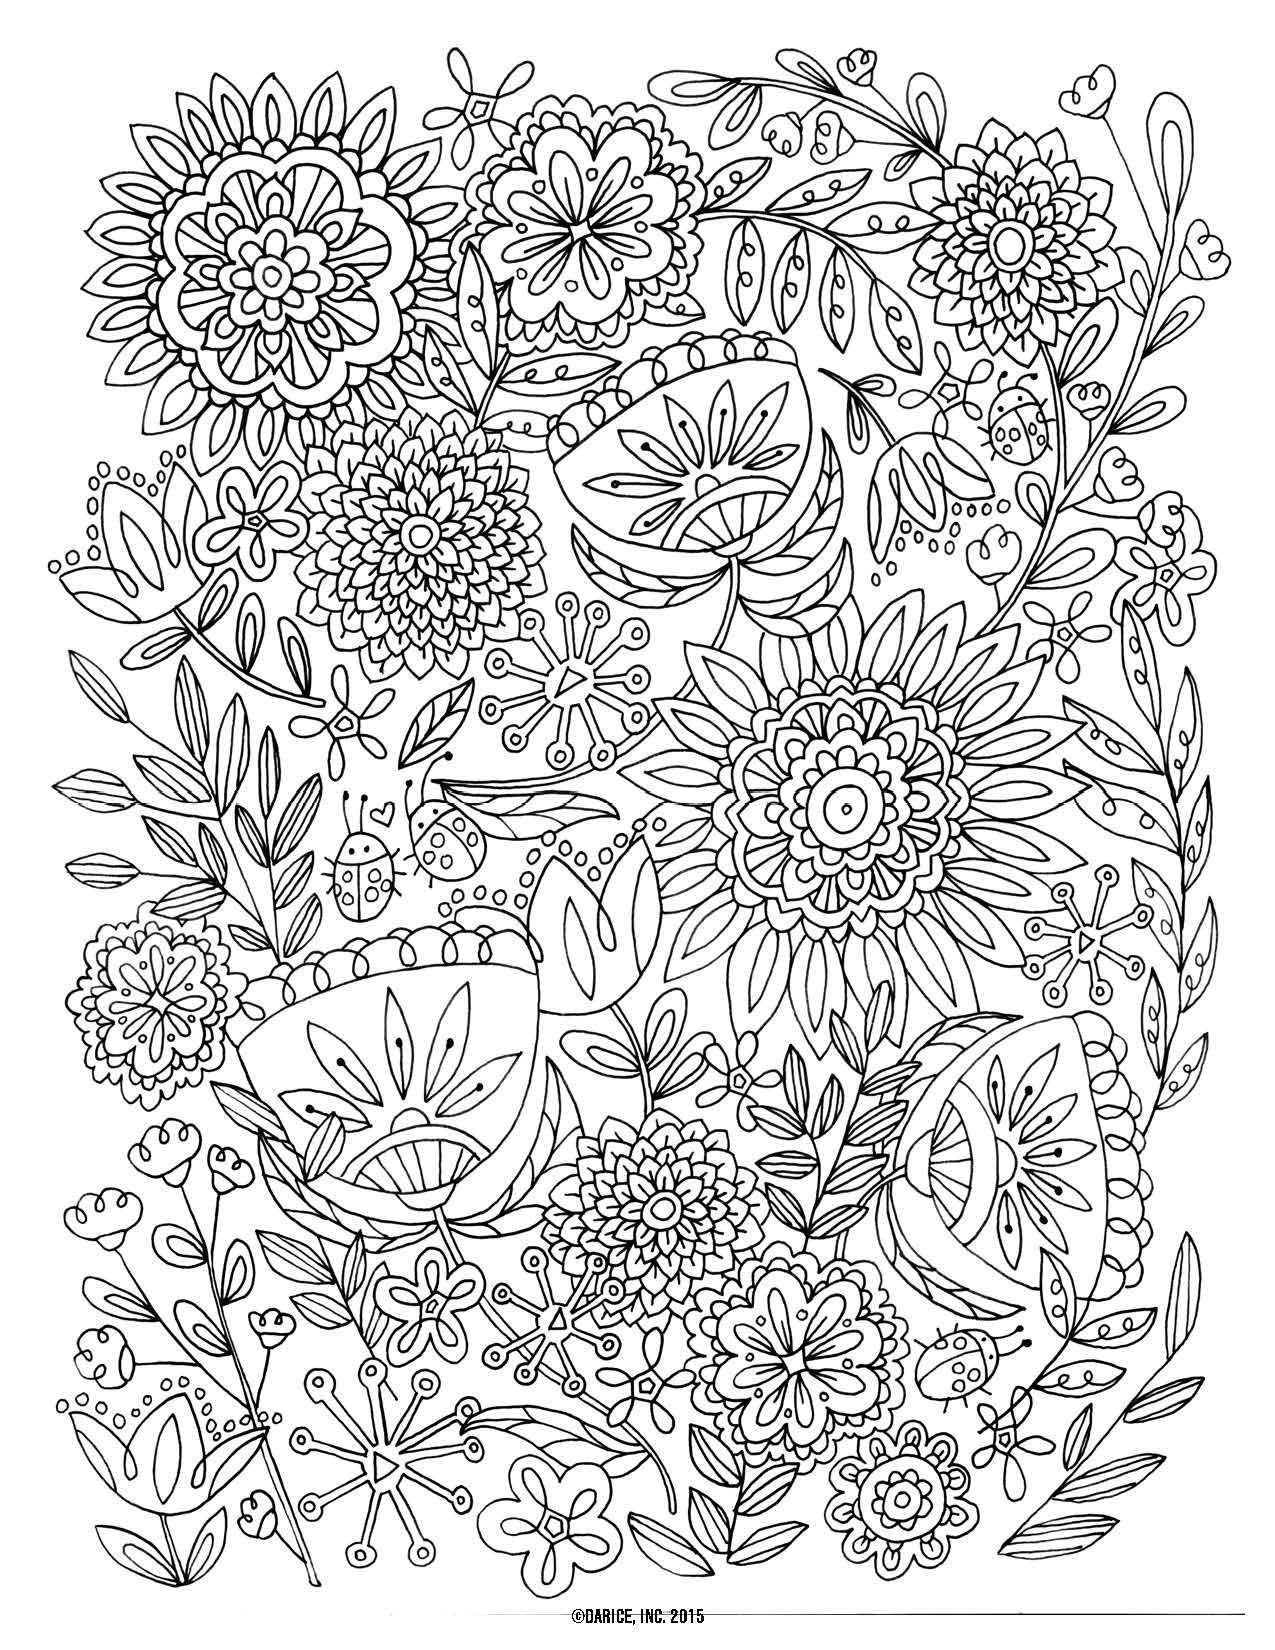 27 Fashionable Vw Bud Vase 2024 free download vw bud vase of 23 flowers in a vase the weekly world inside cool vases flower vase coloring page pages flowers in a top i 0d